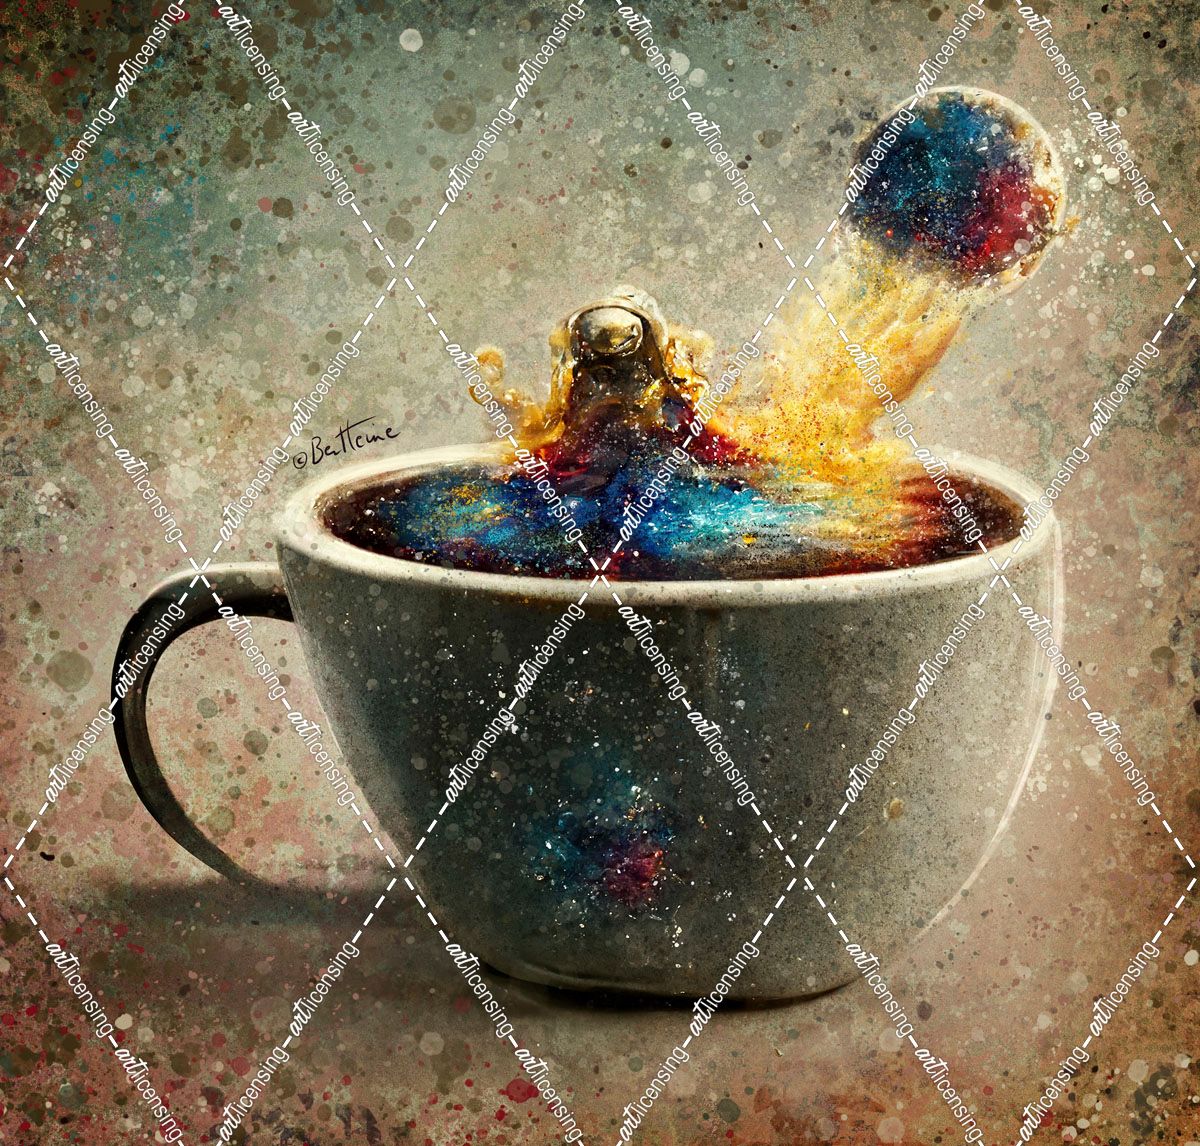 Astro Cruise 19 – A Cup of Coffee